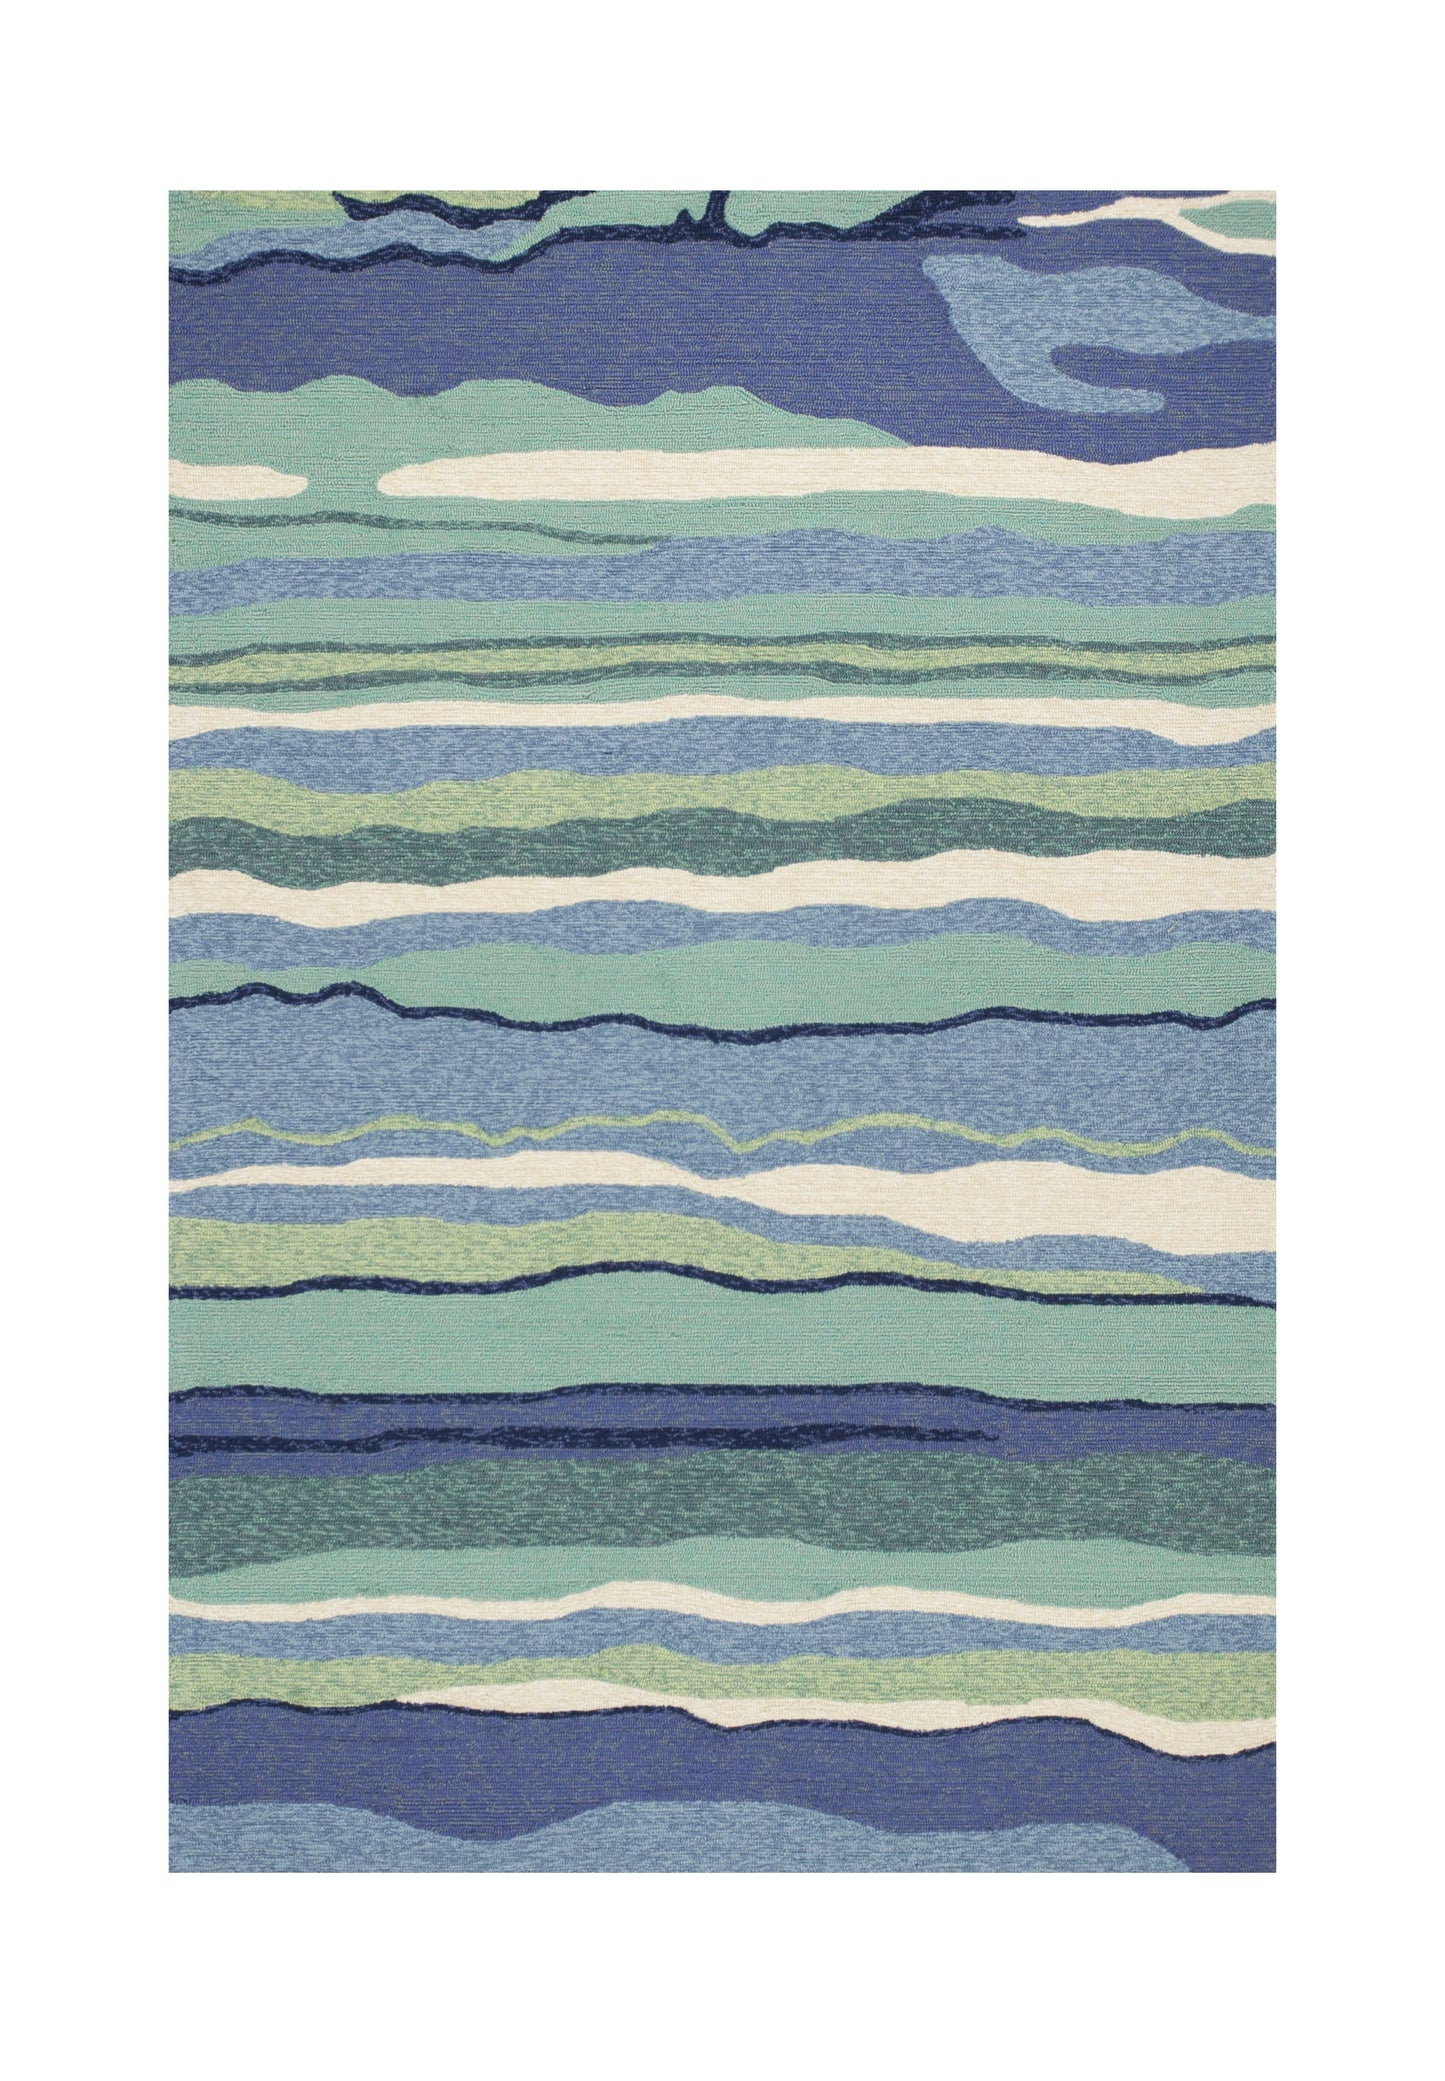 3' X 5' Blue and Ivory Abstract Handmade Indoor Outdoor Area Rug